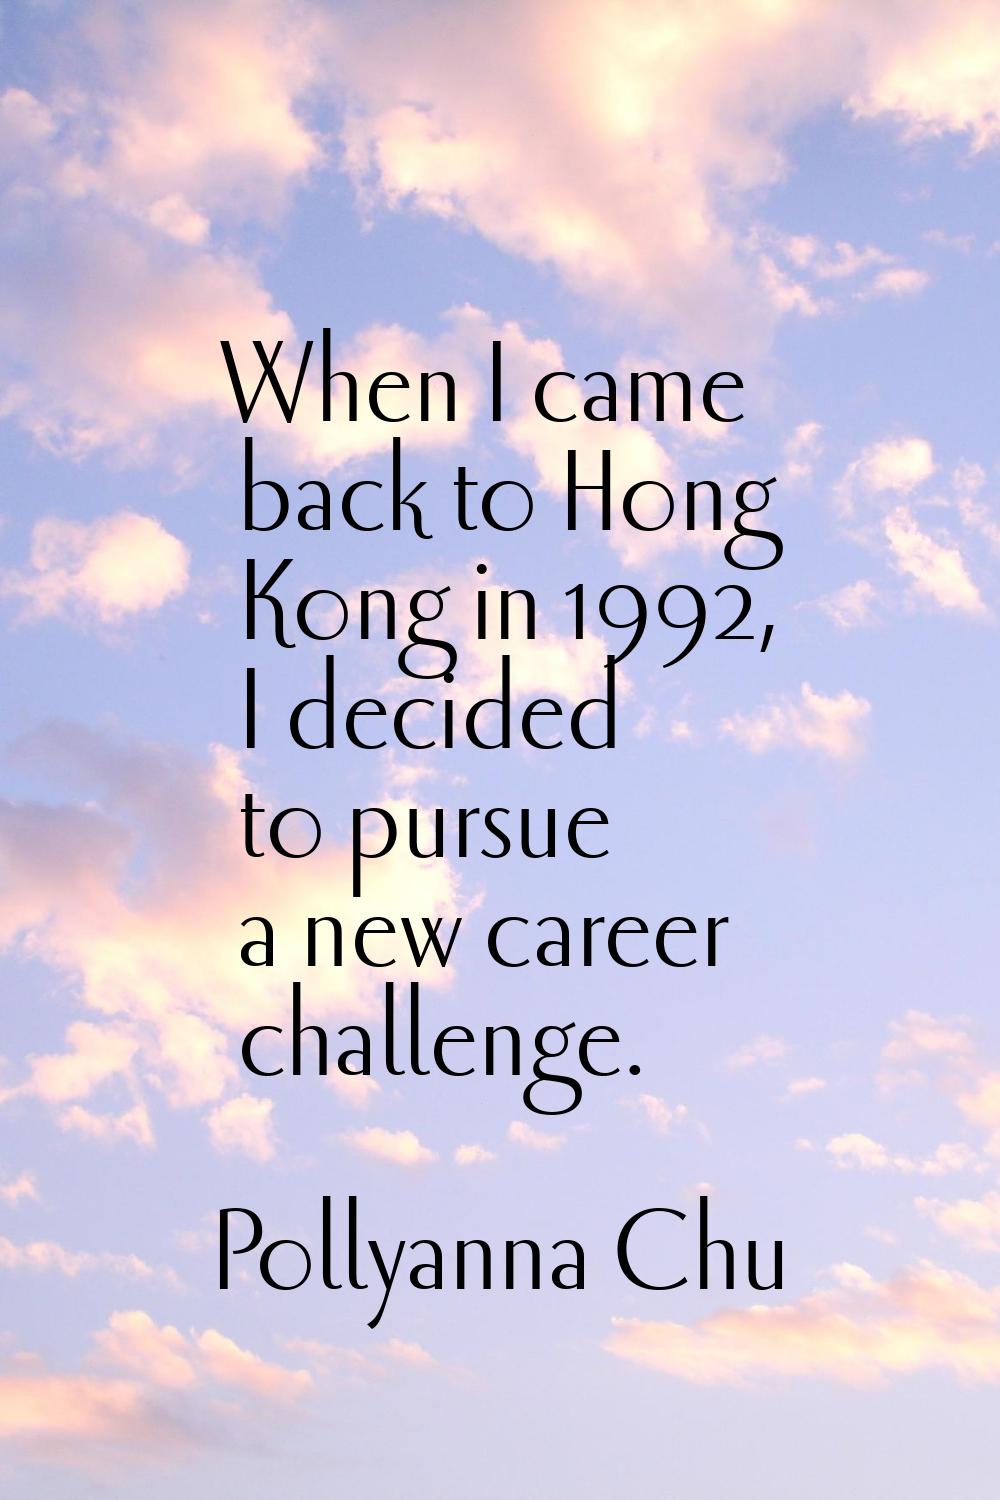 When I came back to Hong Kong in 1992, I decided to pursue a new career challenge.